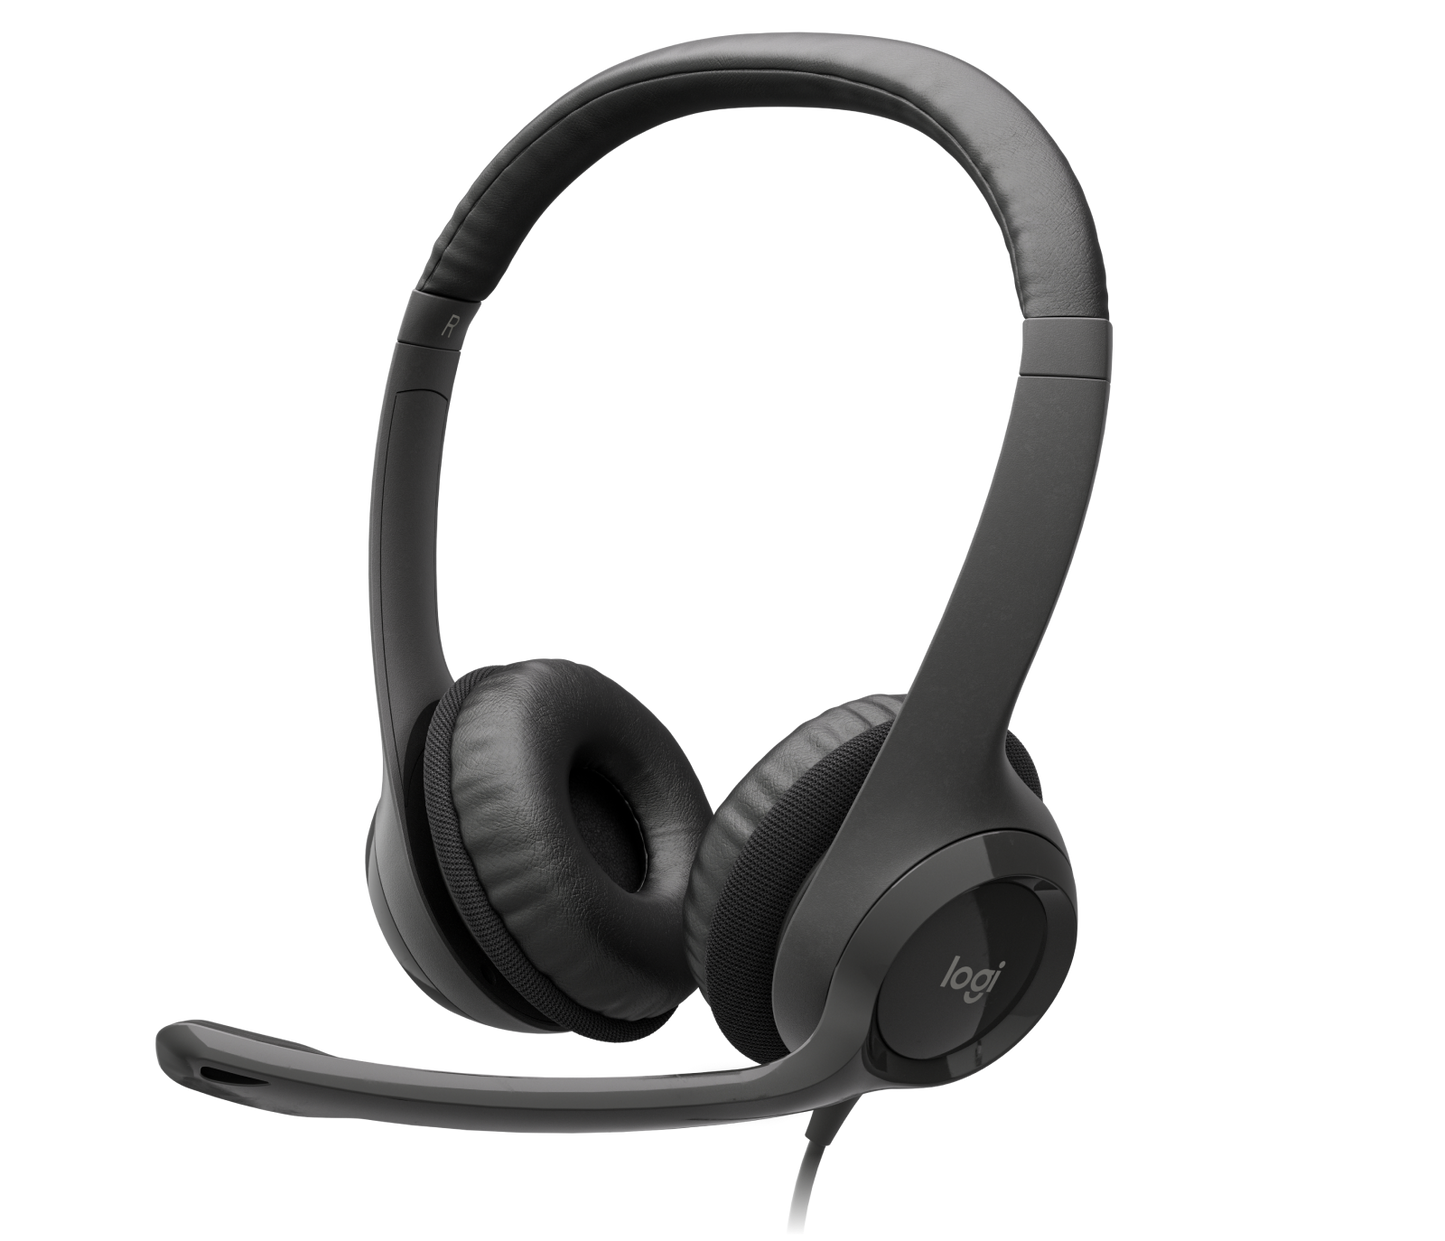 Logitech H390 Comfort USB Headset with Noise Cancelling Mic (Black)